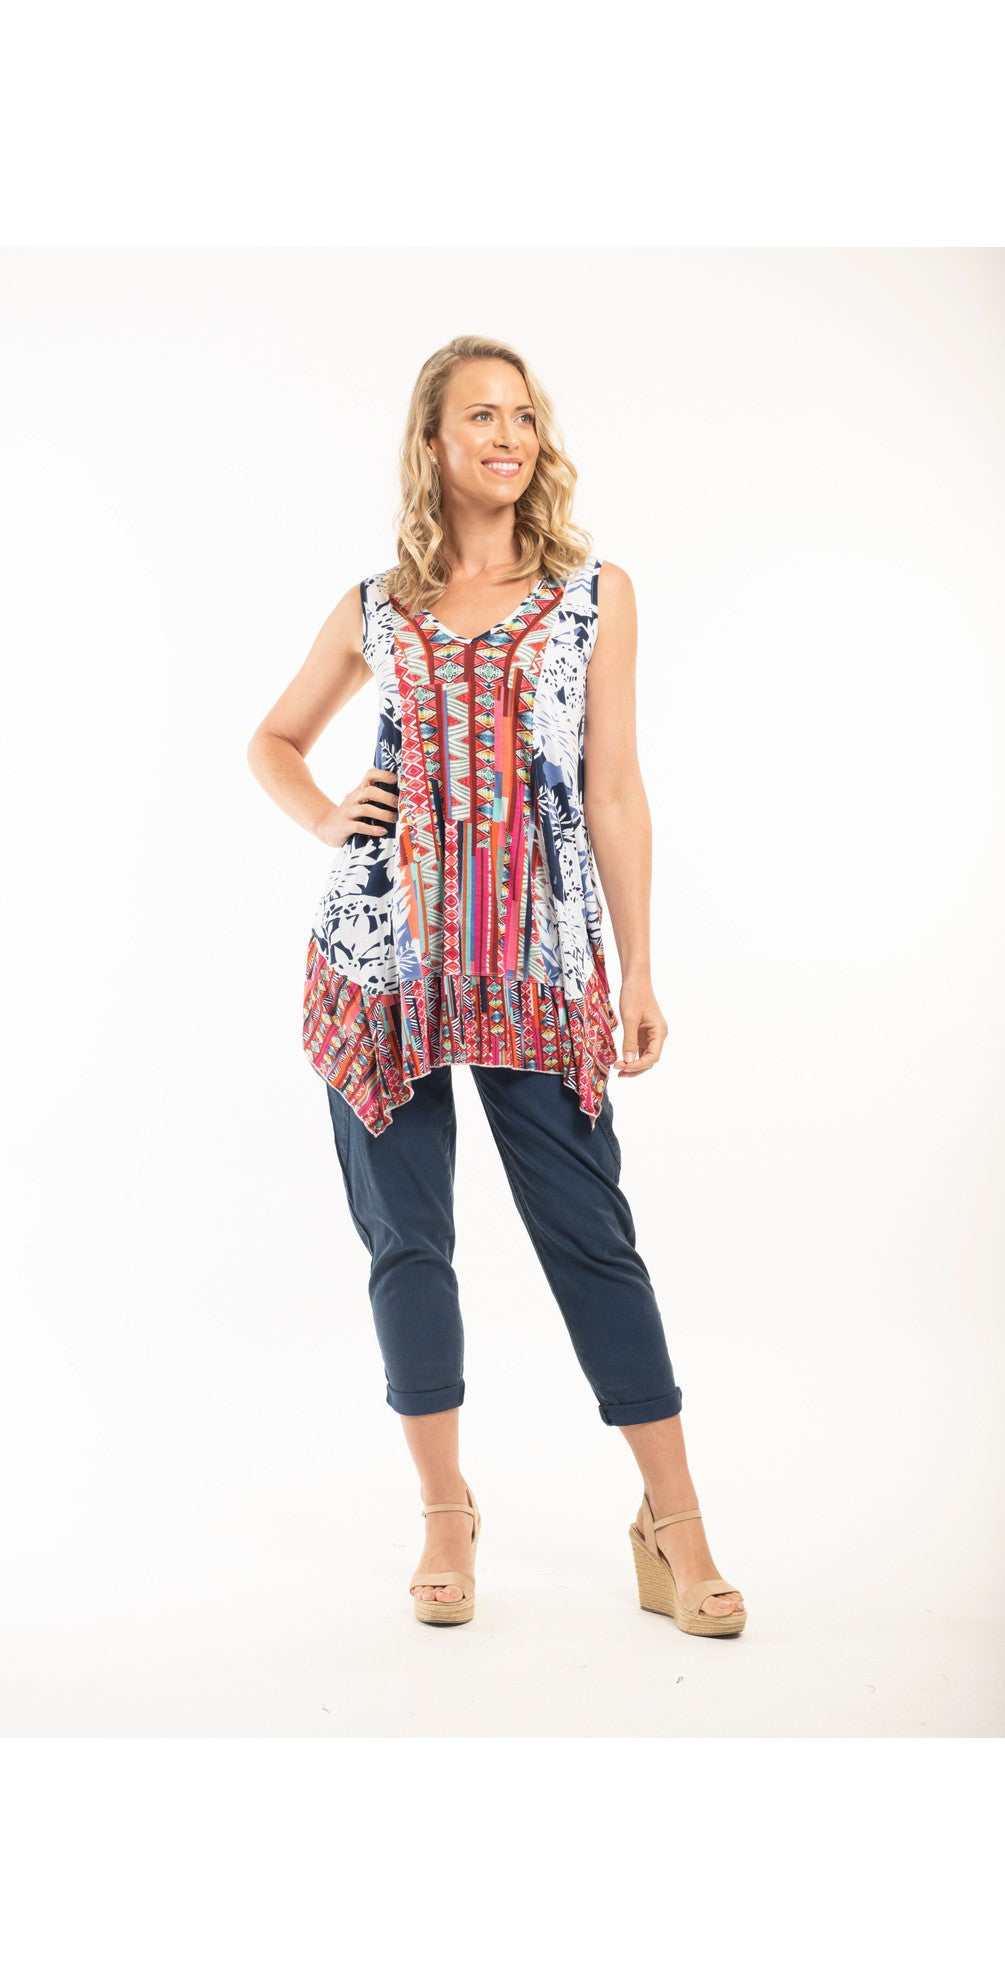 Orientique Skyros multi coloured sleeveless jersey hanky hem tunic top - Boutique on the Green